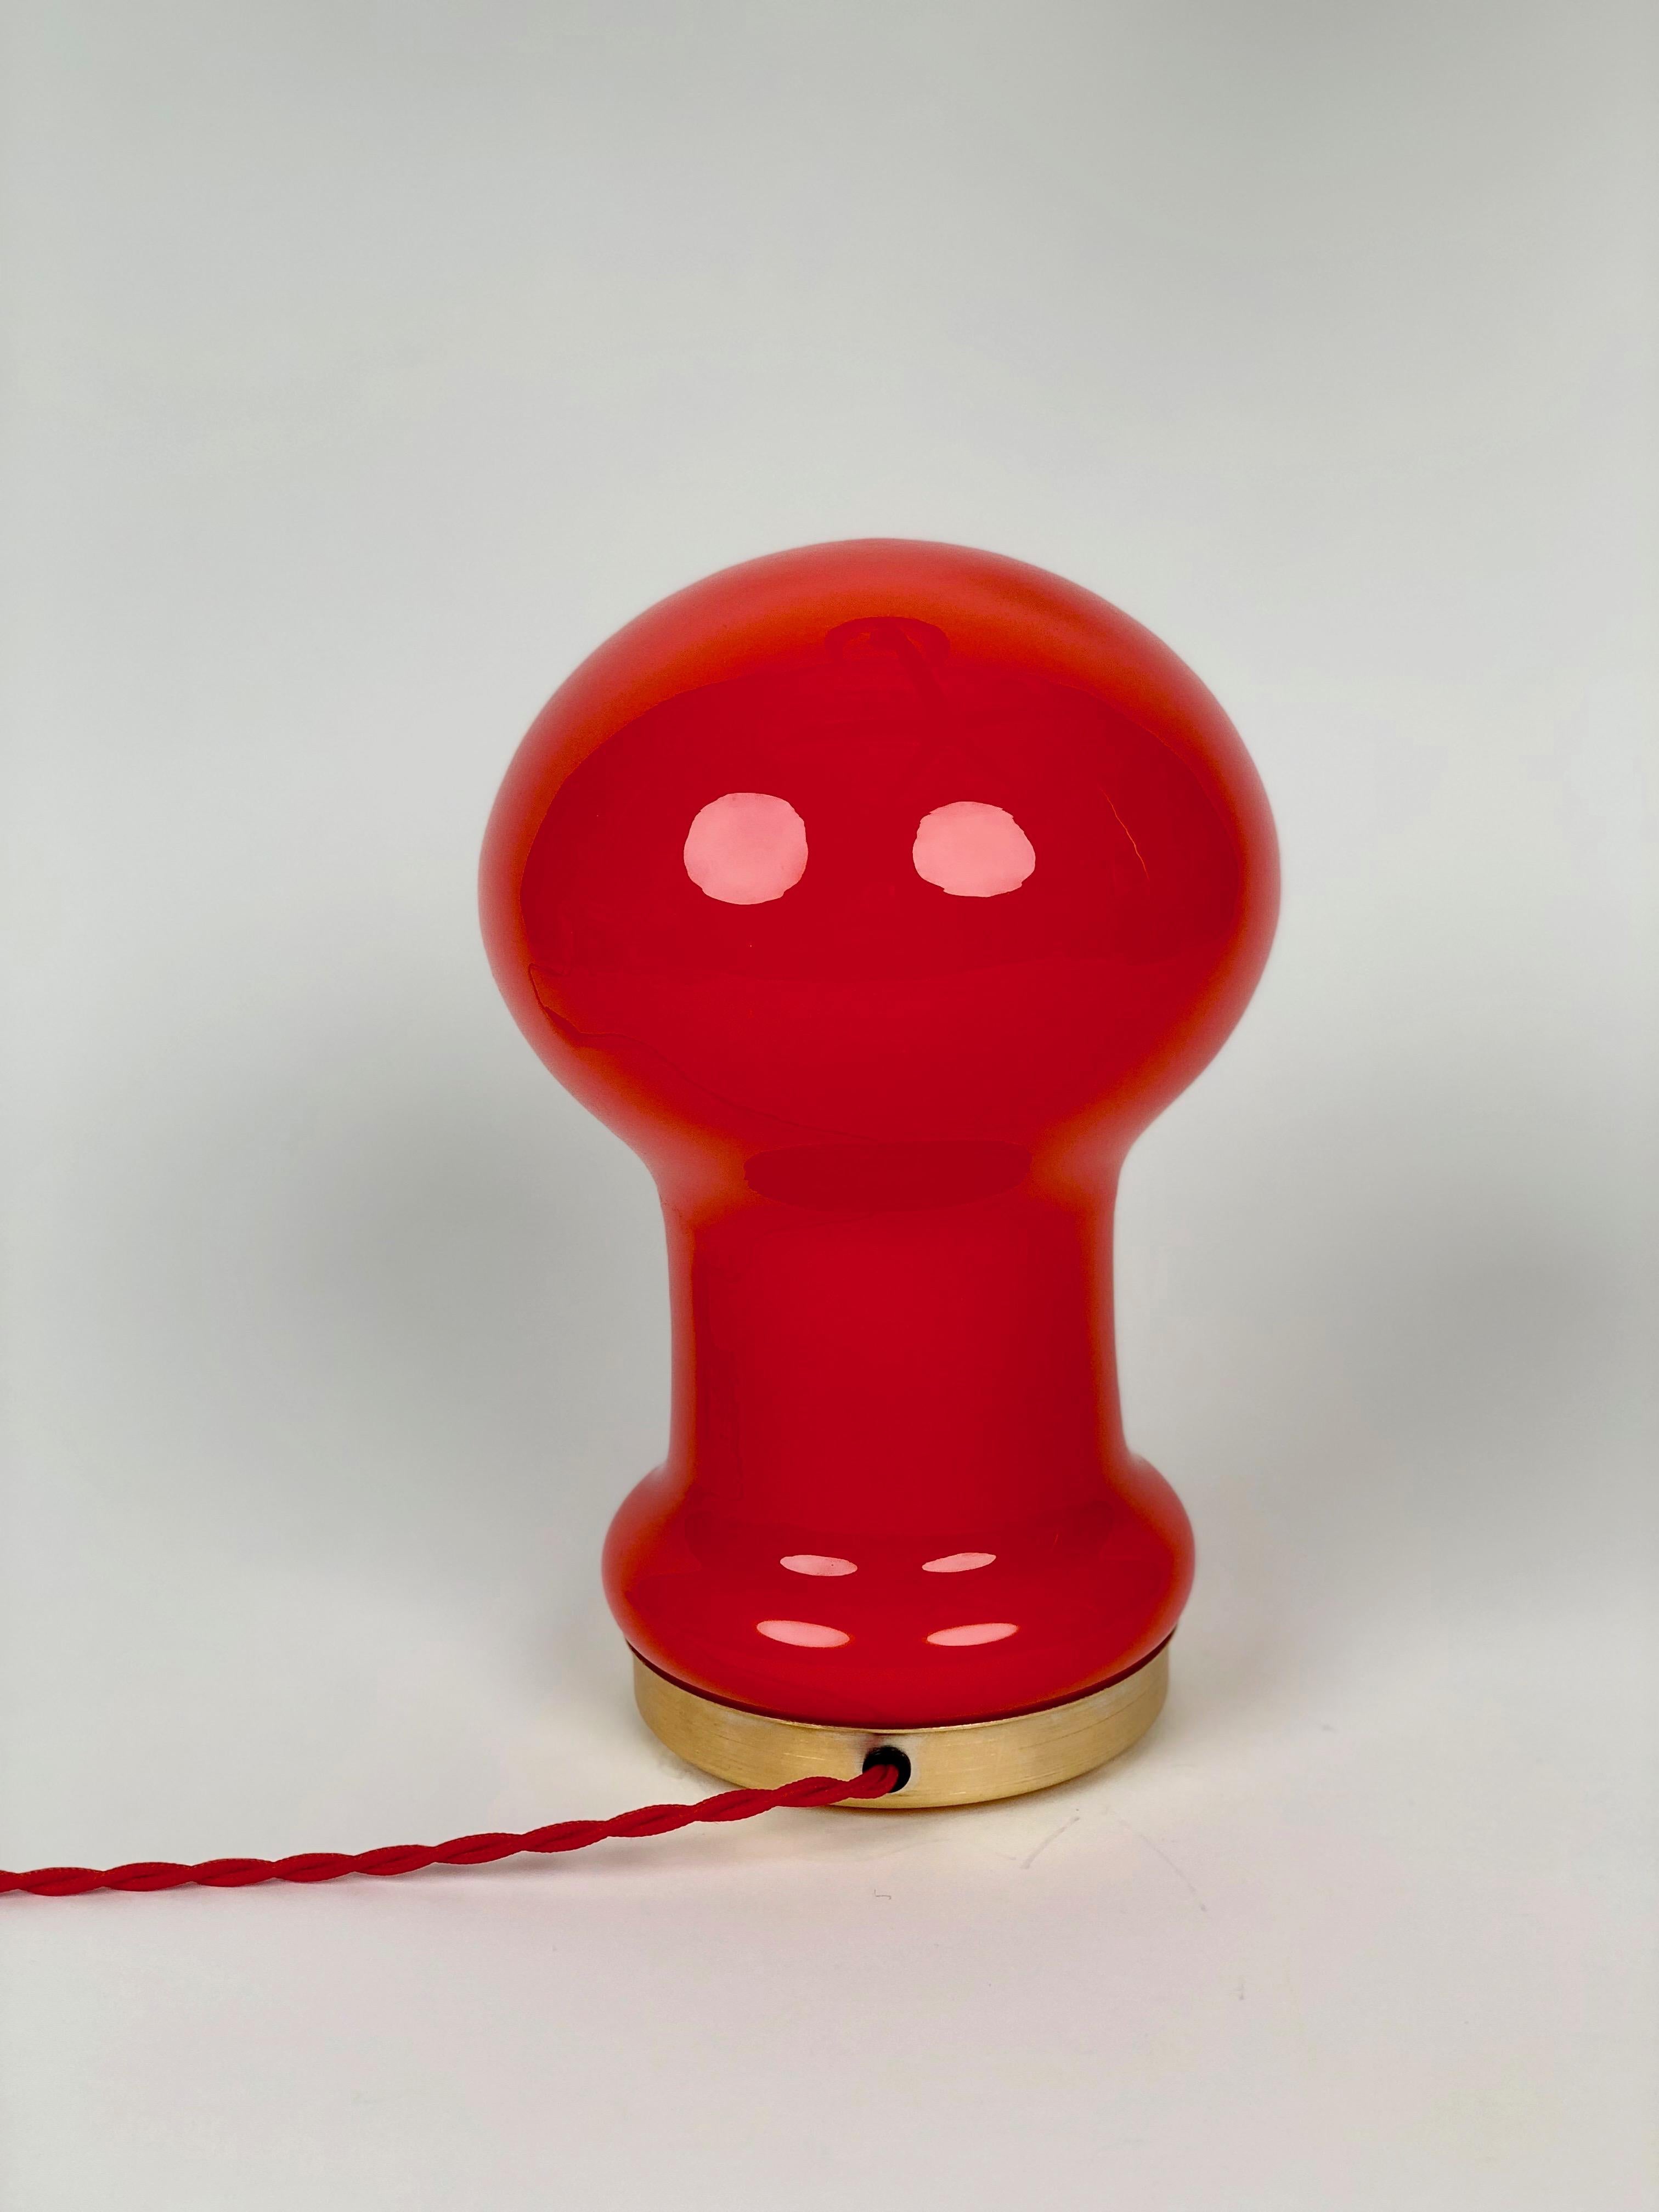 A beautiful red orange, opaline glass table lamp produced by OPP Jihiava and
designed by Stepan Tabery in the 1970's in Czechoslovakia.

The metal base is made from brass coloured aluminium , the new textile cable is from Italy and gives the lamp a